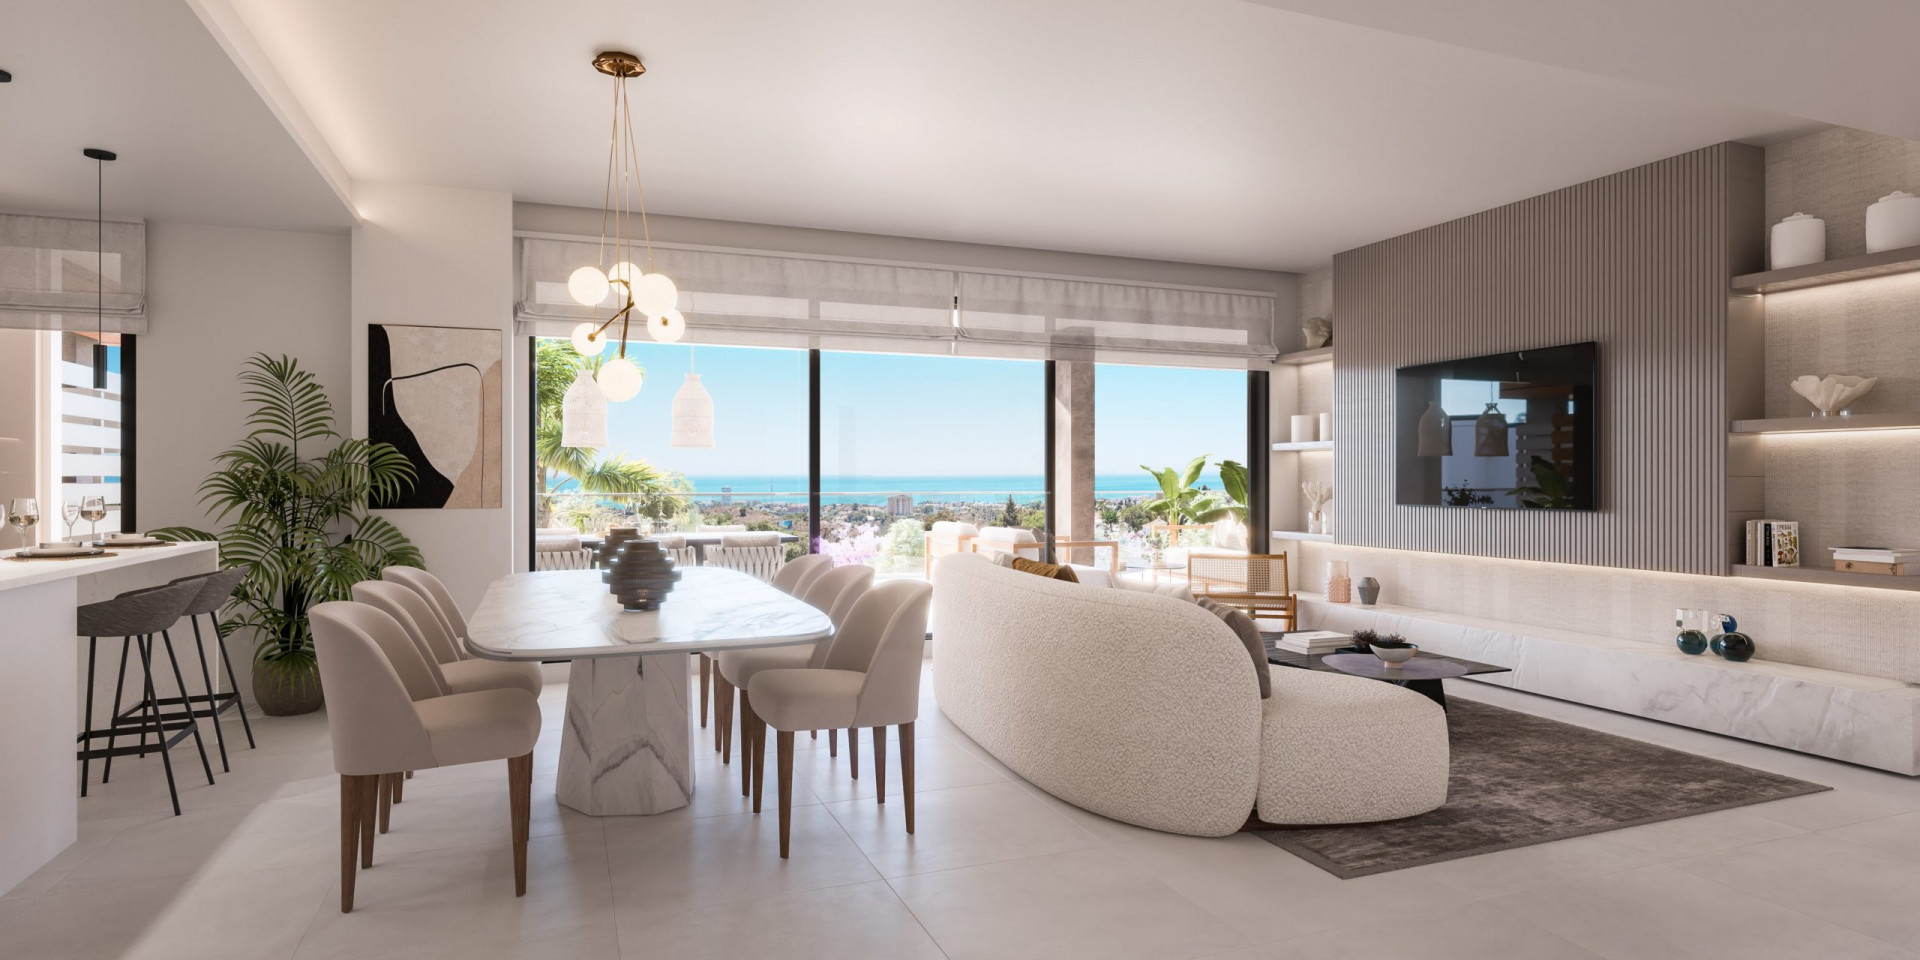 Three bedroom penthouse with solarium and panoramic views of the coastline east of Marbella. | Image 3